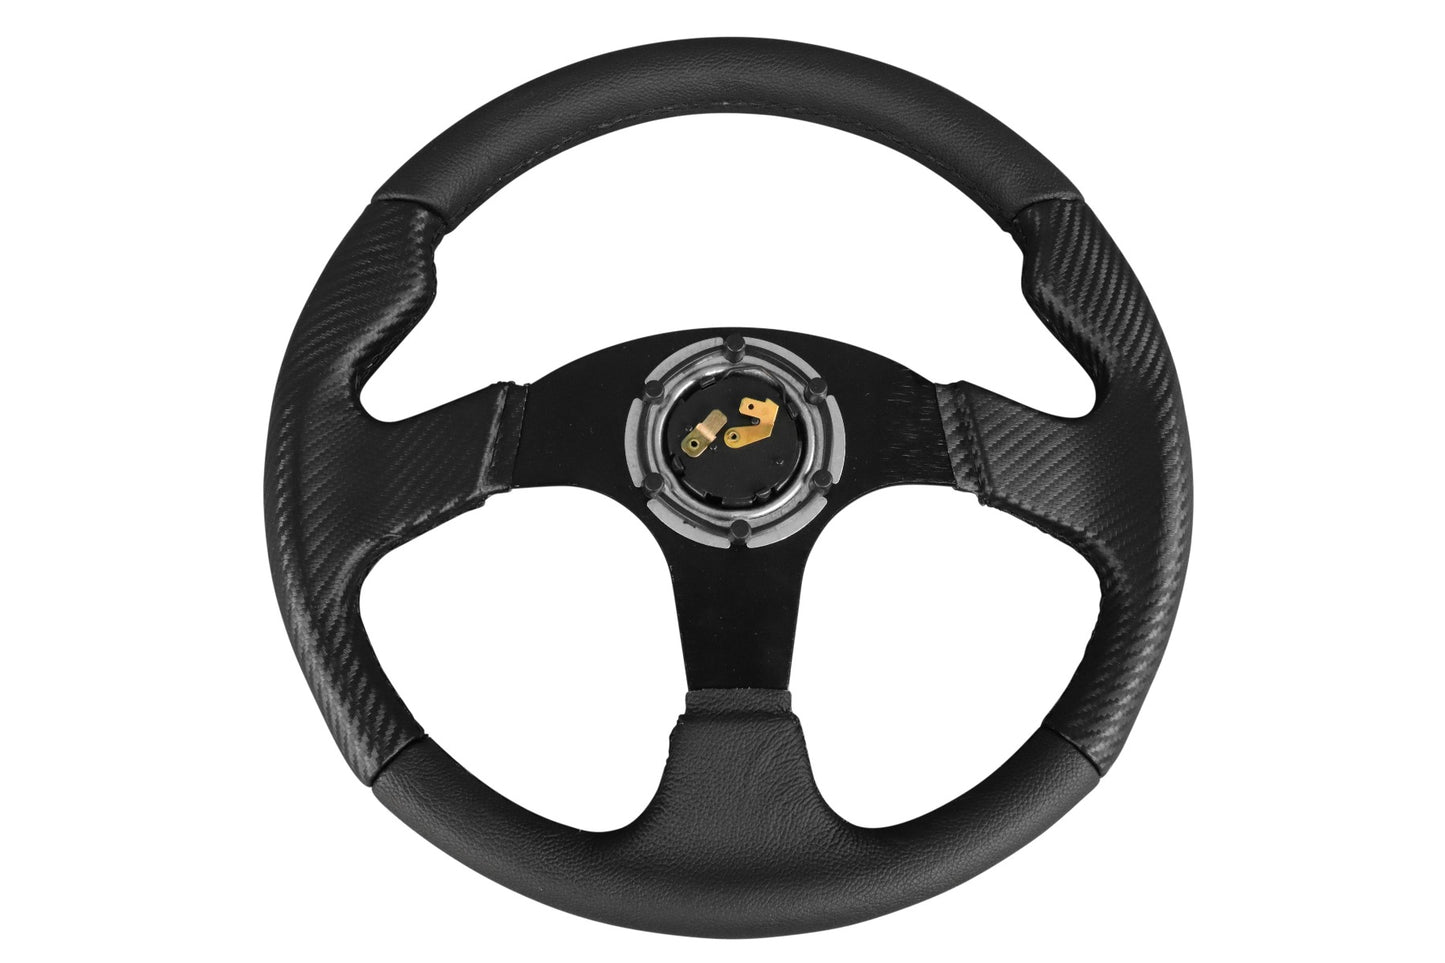 TWIST DYNAMICS ROUND STEERING WHEEL KIT WITH ADAPTER FOR THE POLARIS SLINGSHOT